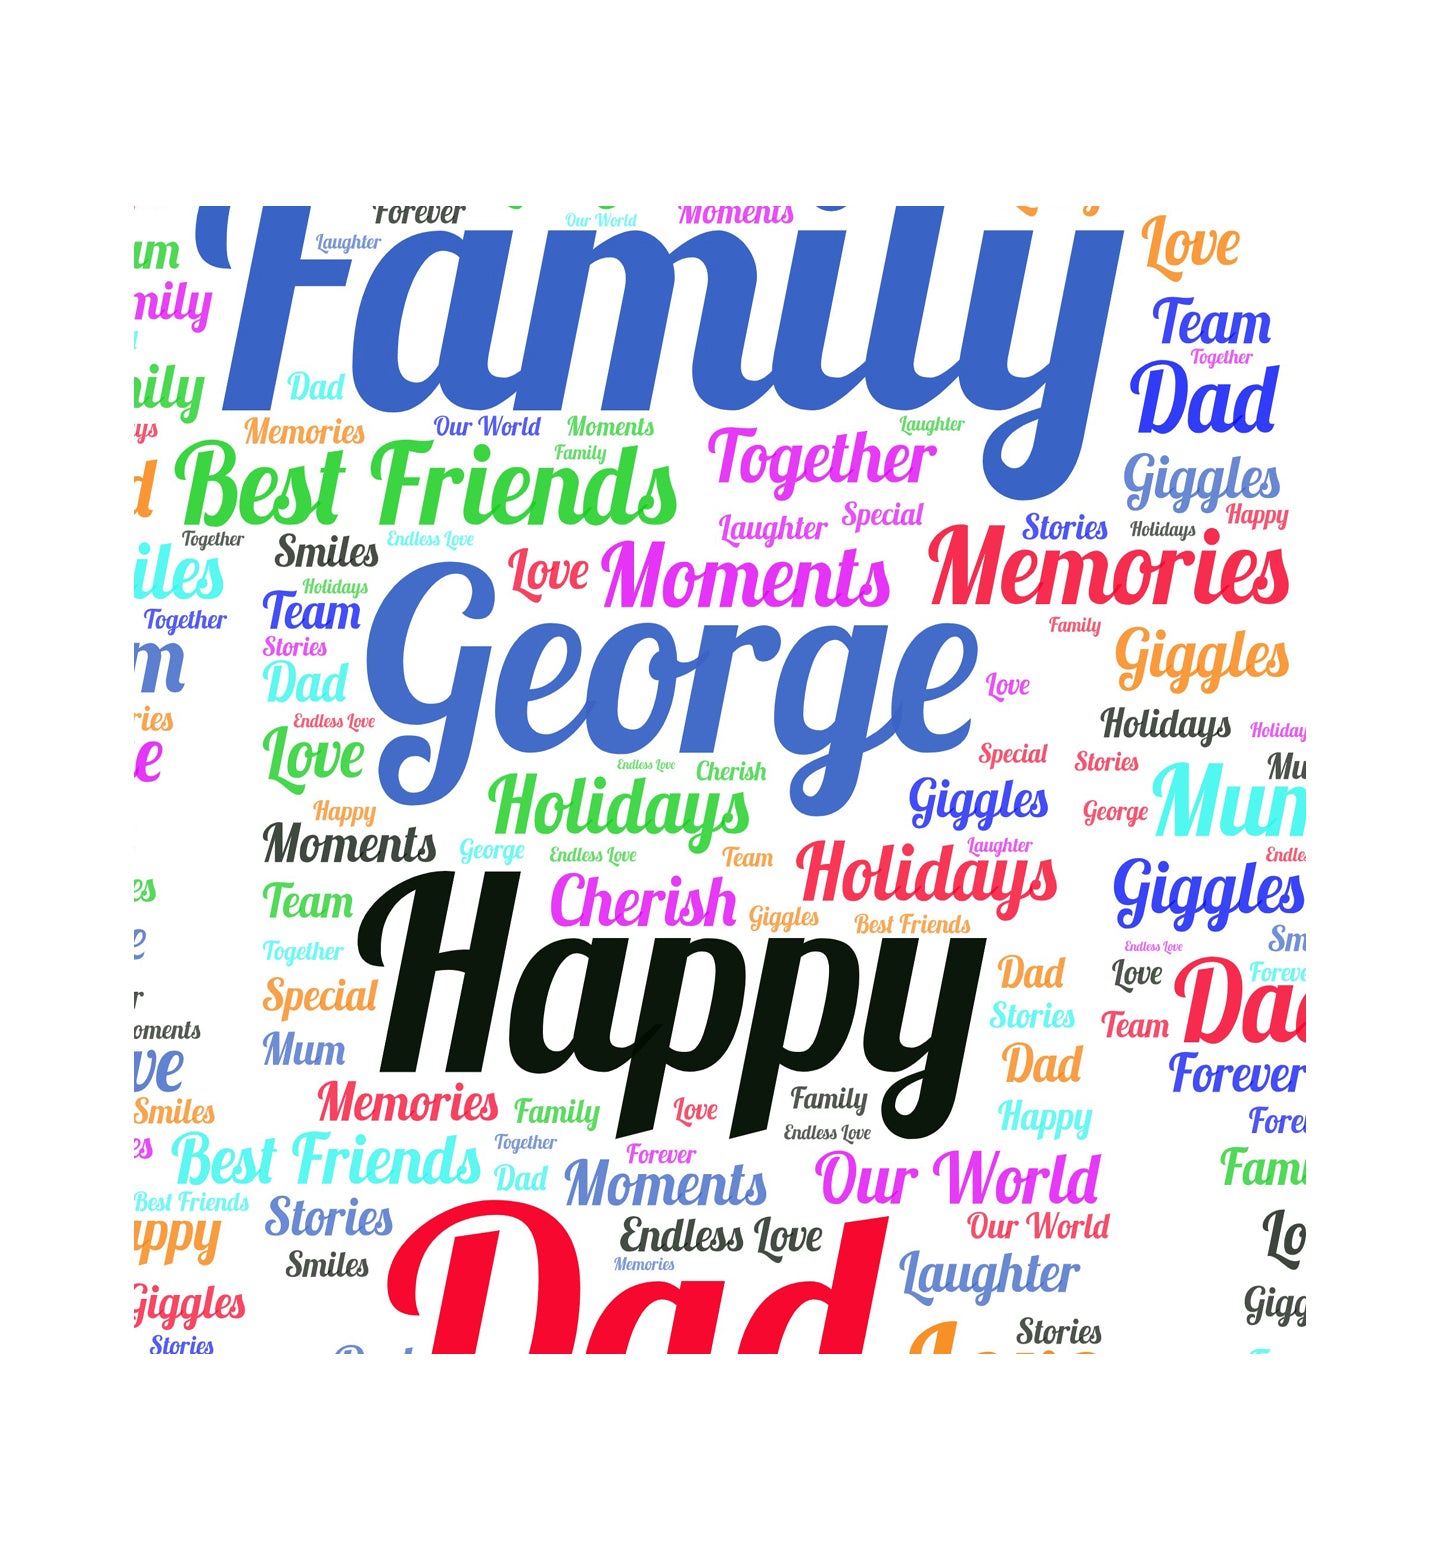 friends and family word art